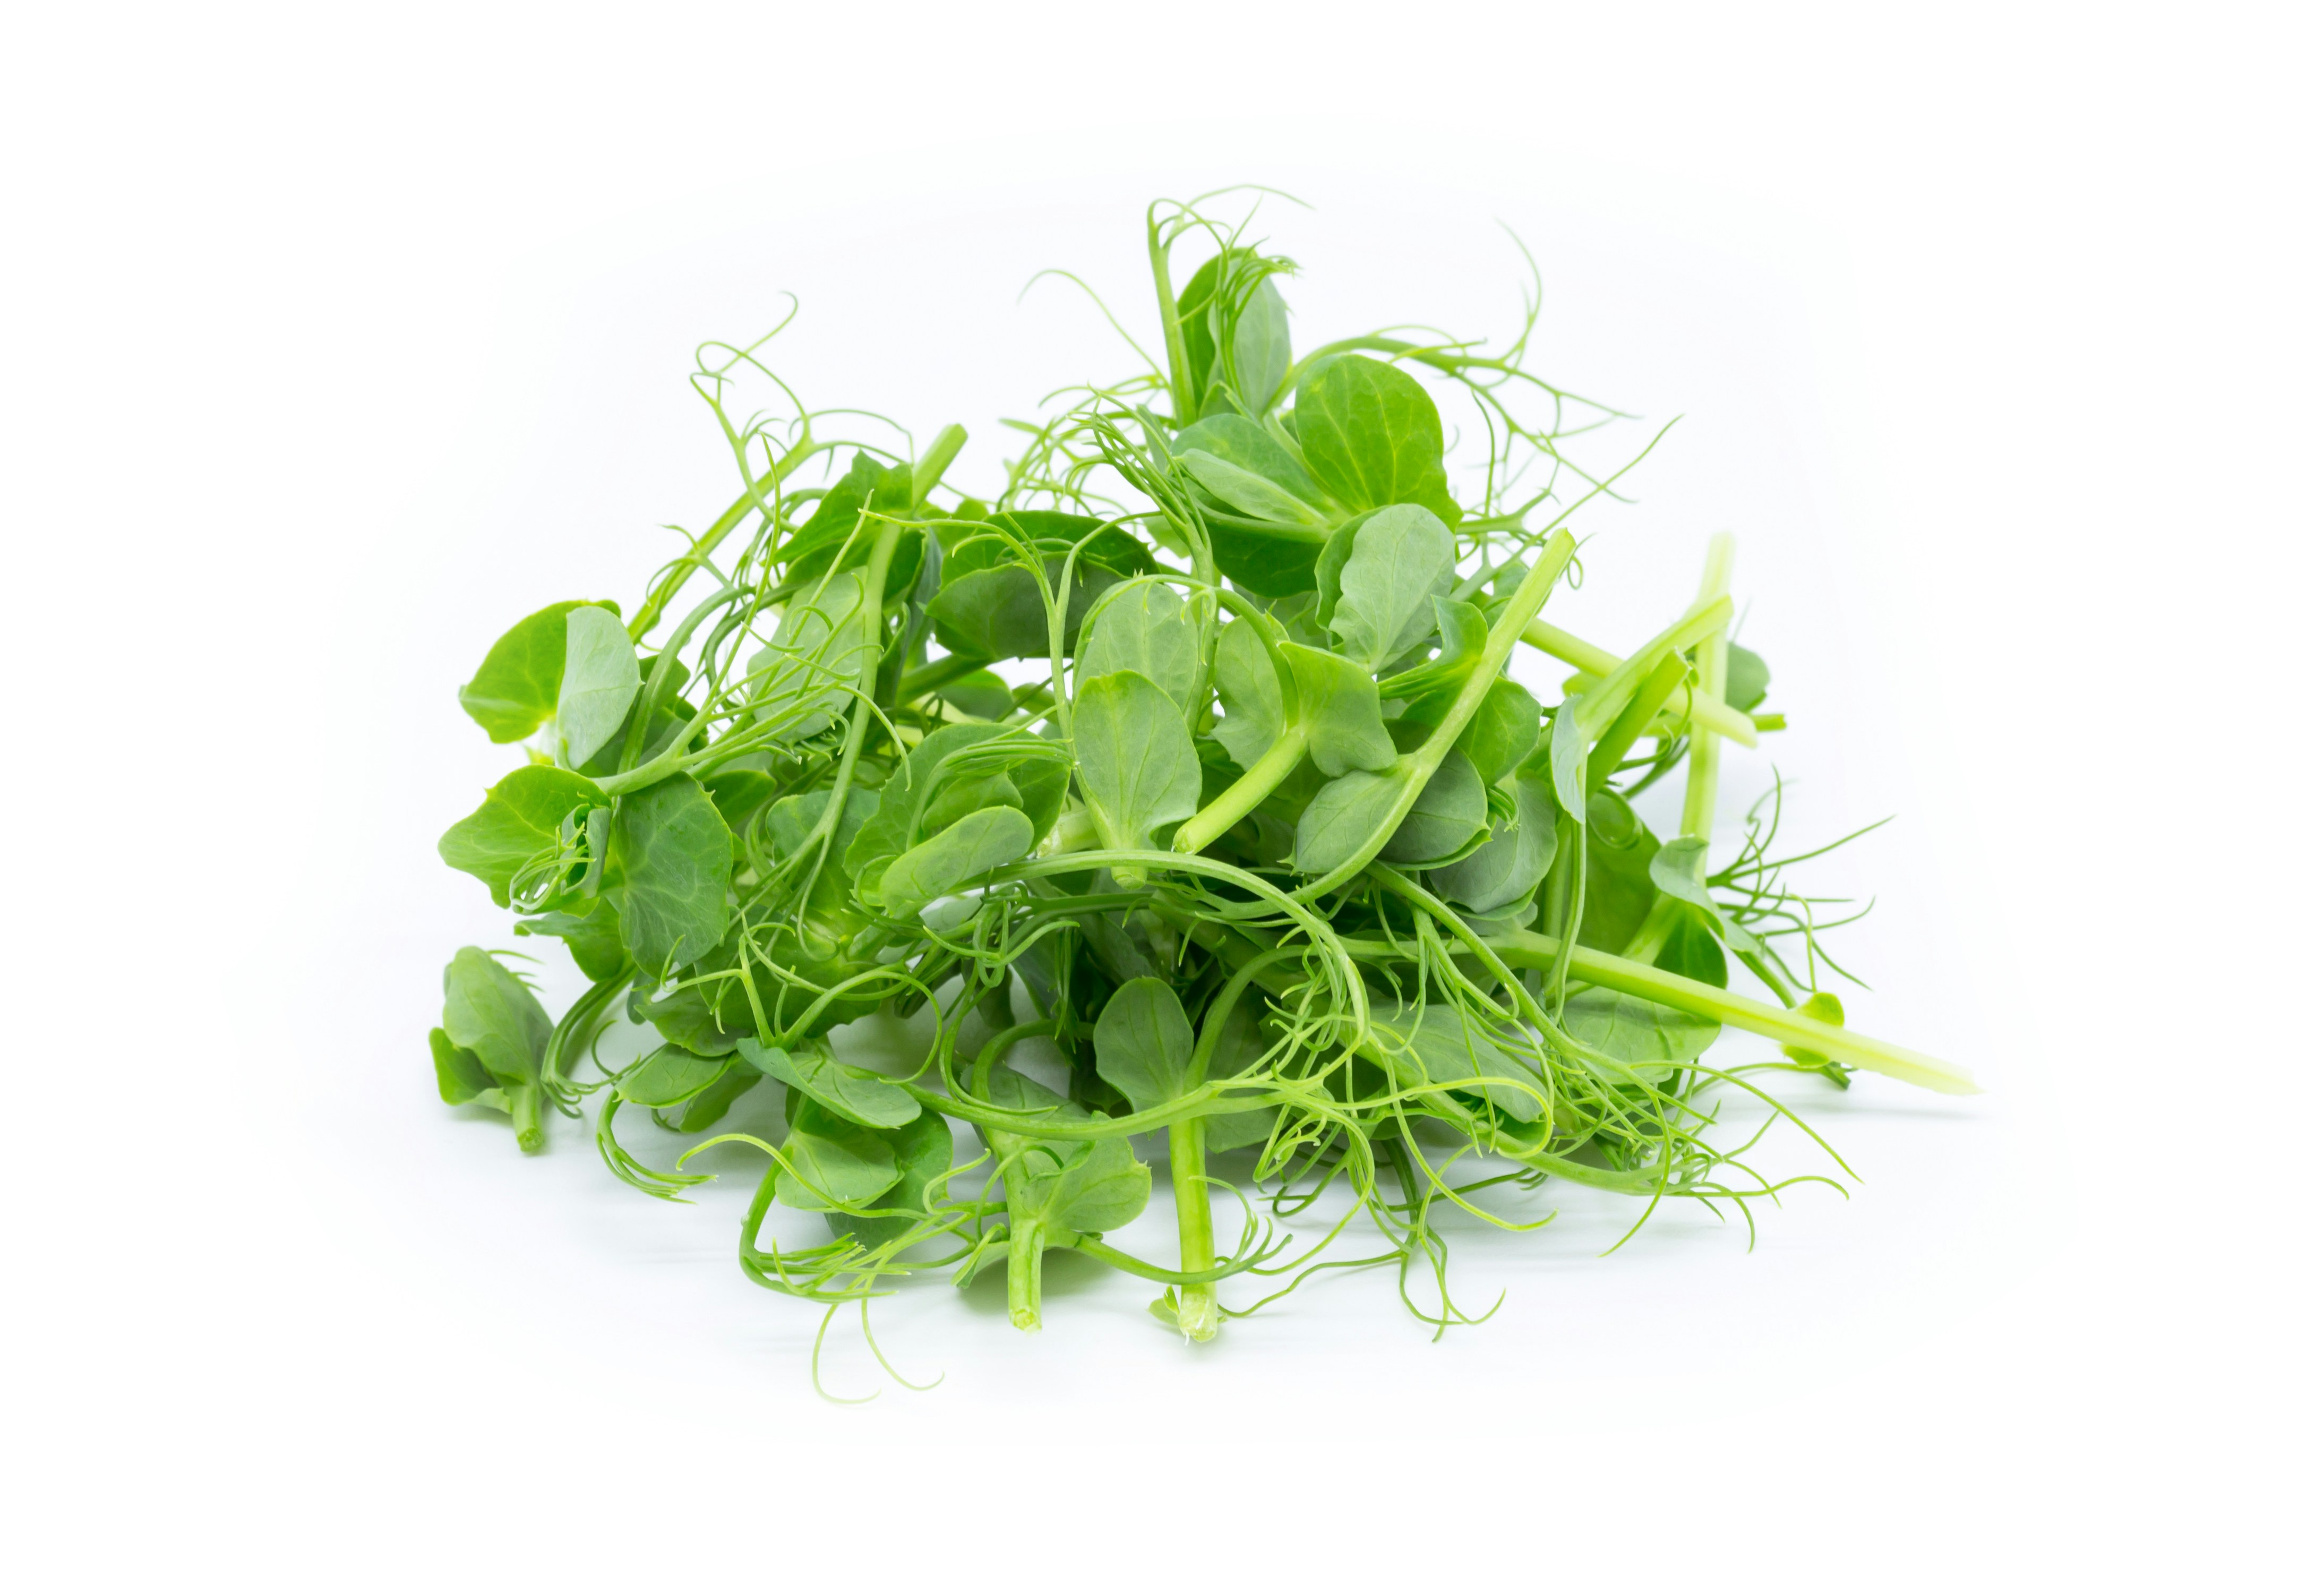 pea plant on a white background